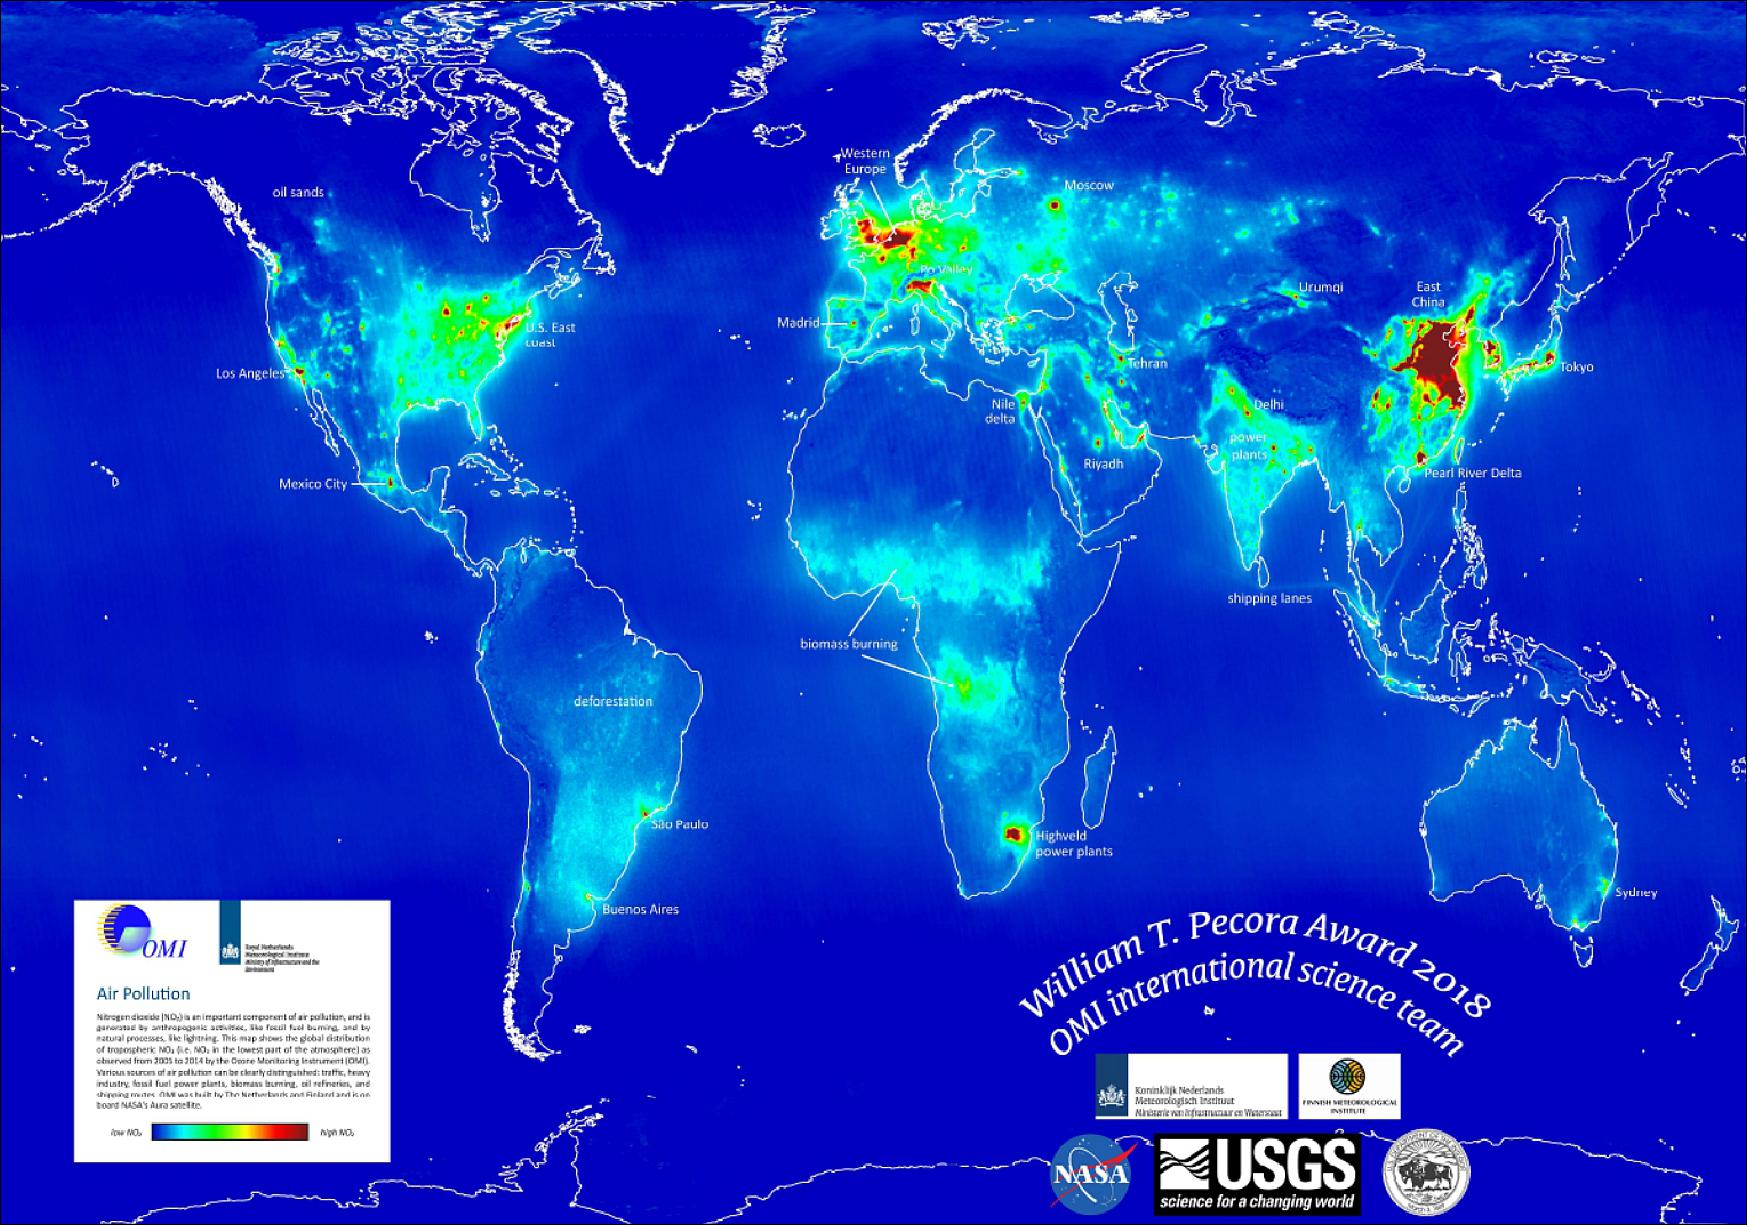 Figure 26: Global map of 2005-2014 OMI tropospheric column NO2 with scale ranging from low (blue) to high NO2 (red) values. Sources of NO2 are indicated on the map such as highly populated areas, shipping lanes, power plants, oil & gas operations, and biomass burning (image credit: KNMI) 25)